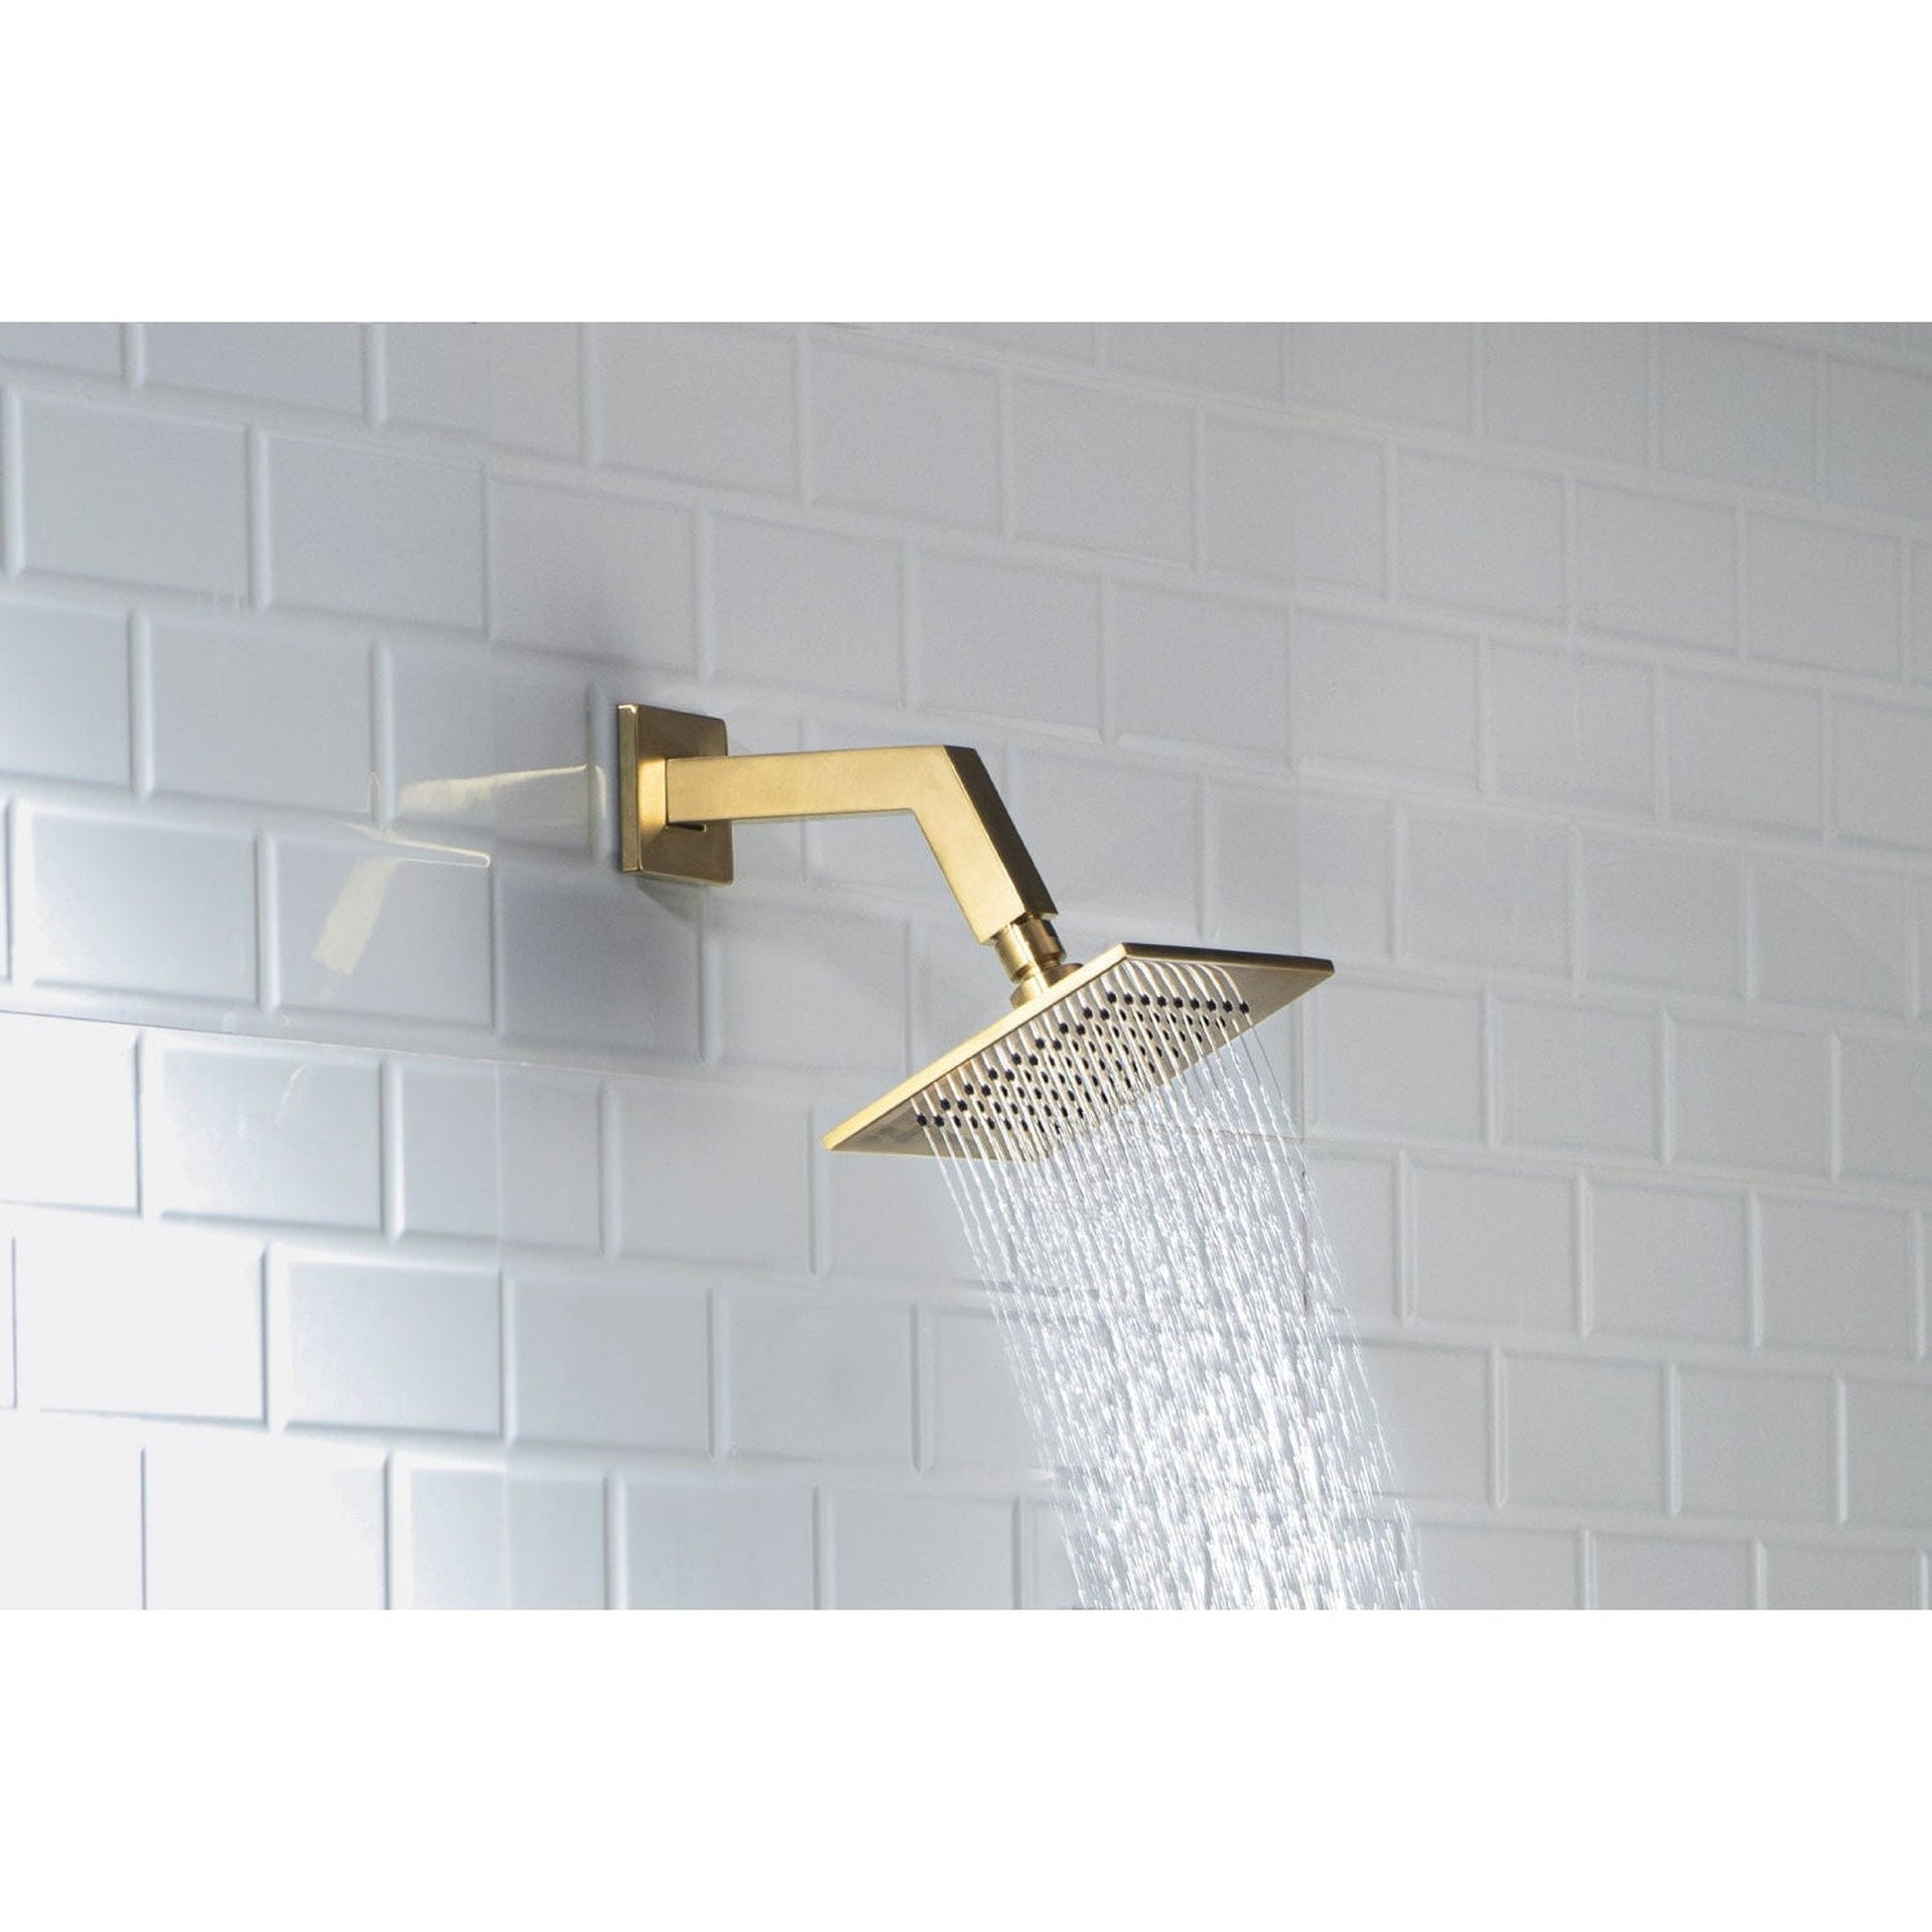 Isenberg Serie 160 Single Output Brushed Nickel PVD Wall-Mounted Shower Set With 6" Solid Brass Rainhead Shower Head, Single Handle Shower Trim and 1-Output Single Control Pressure Balance Valve